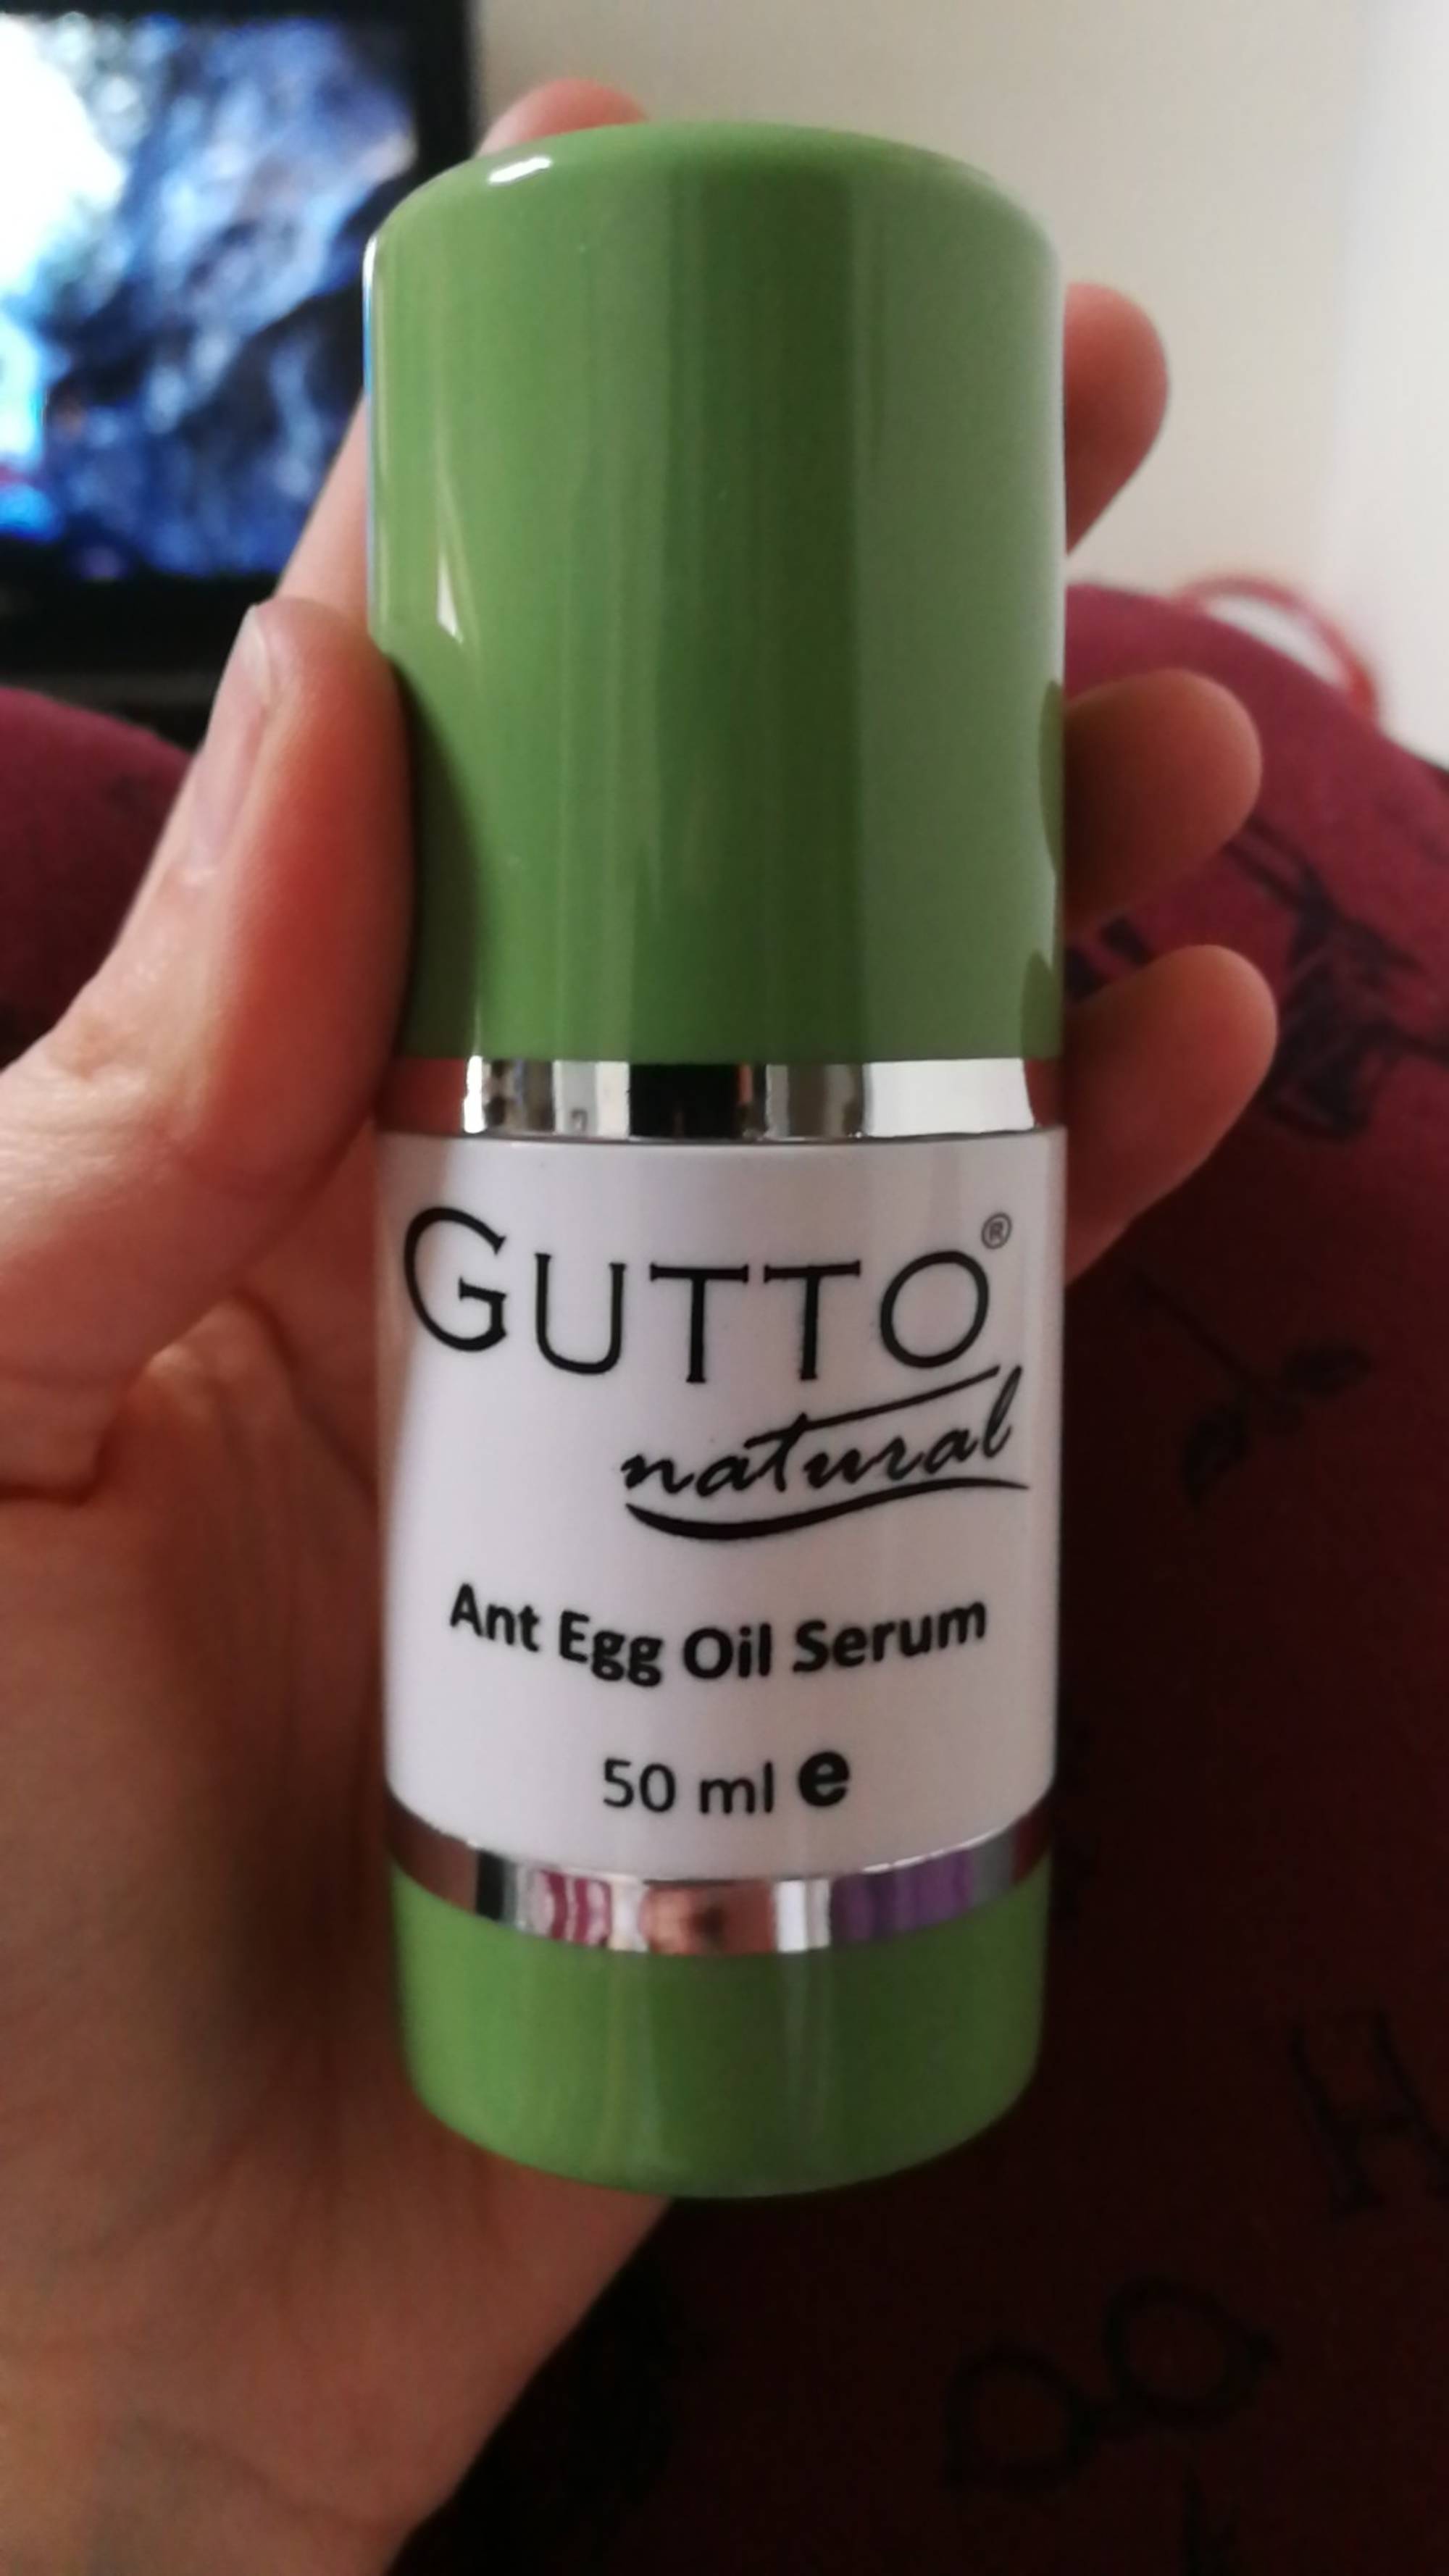 GUTTO NATURAL - Ant egg oil serum